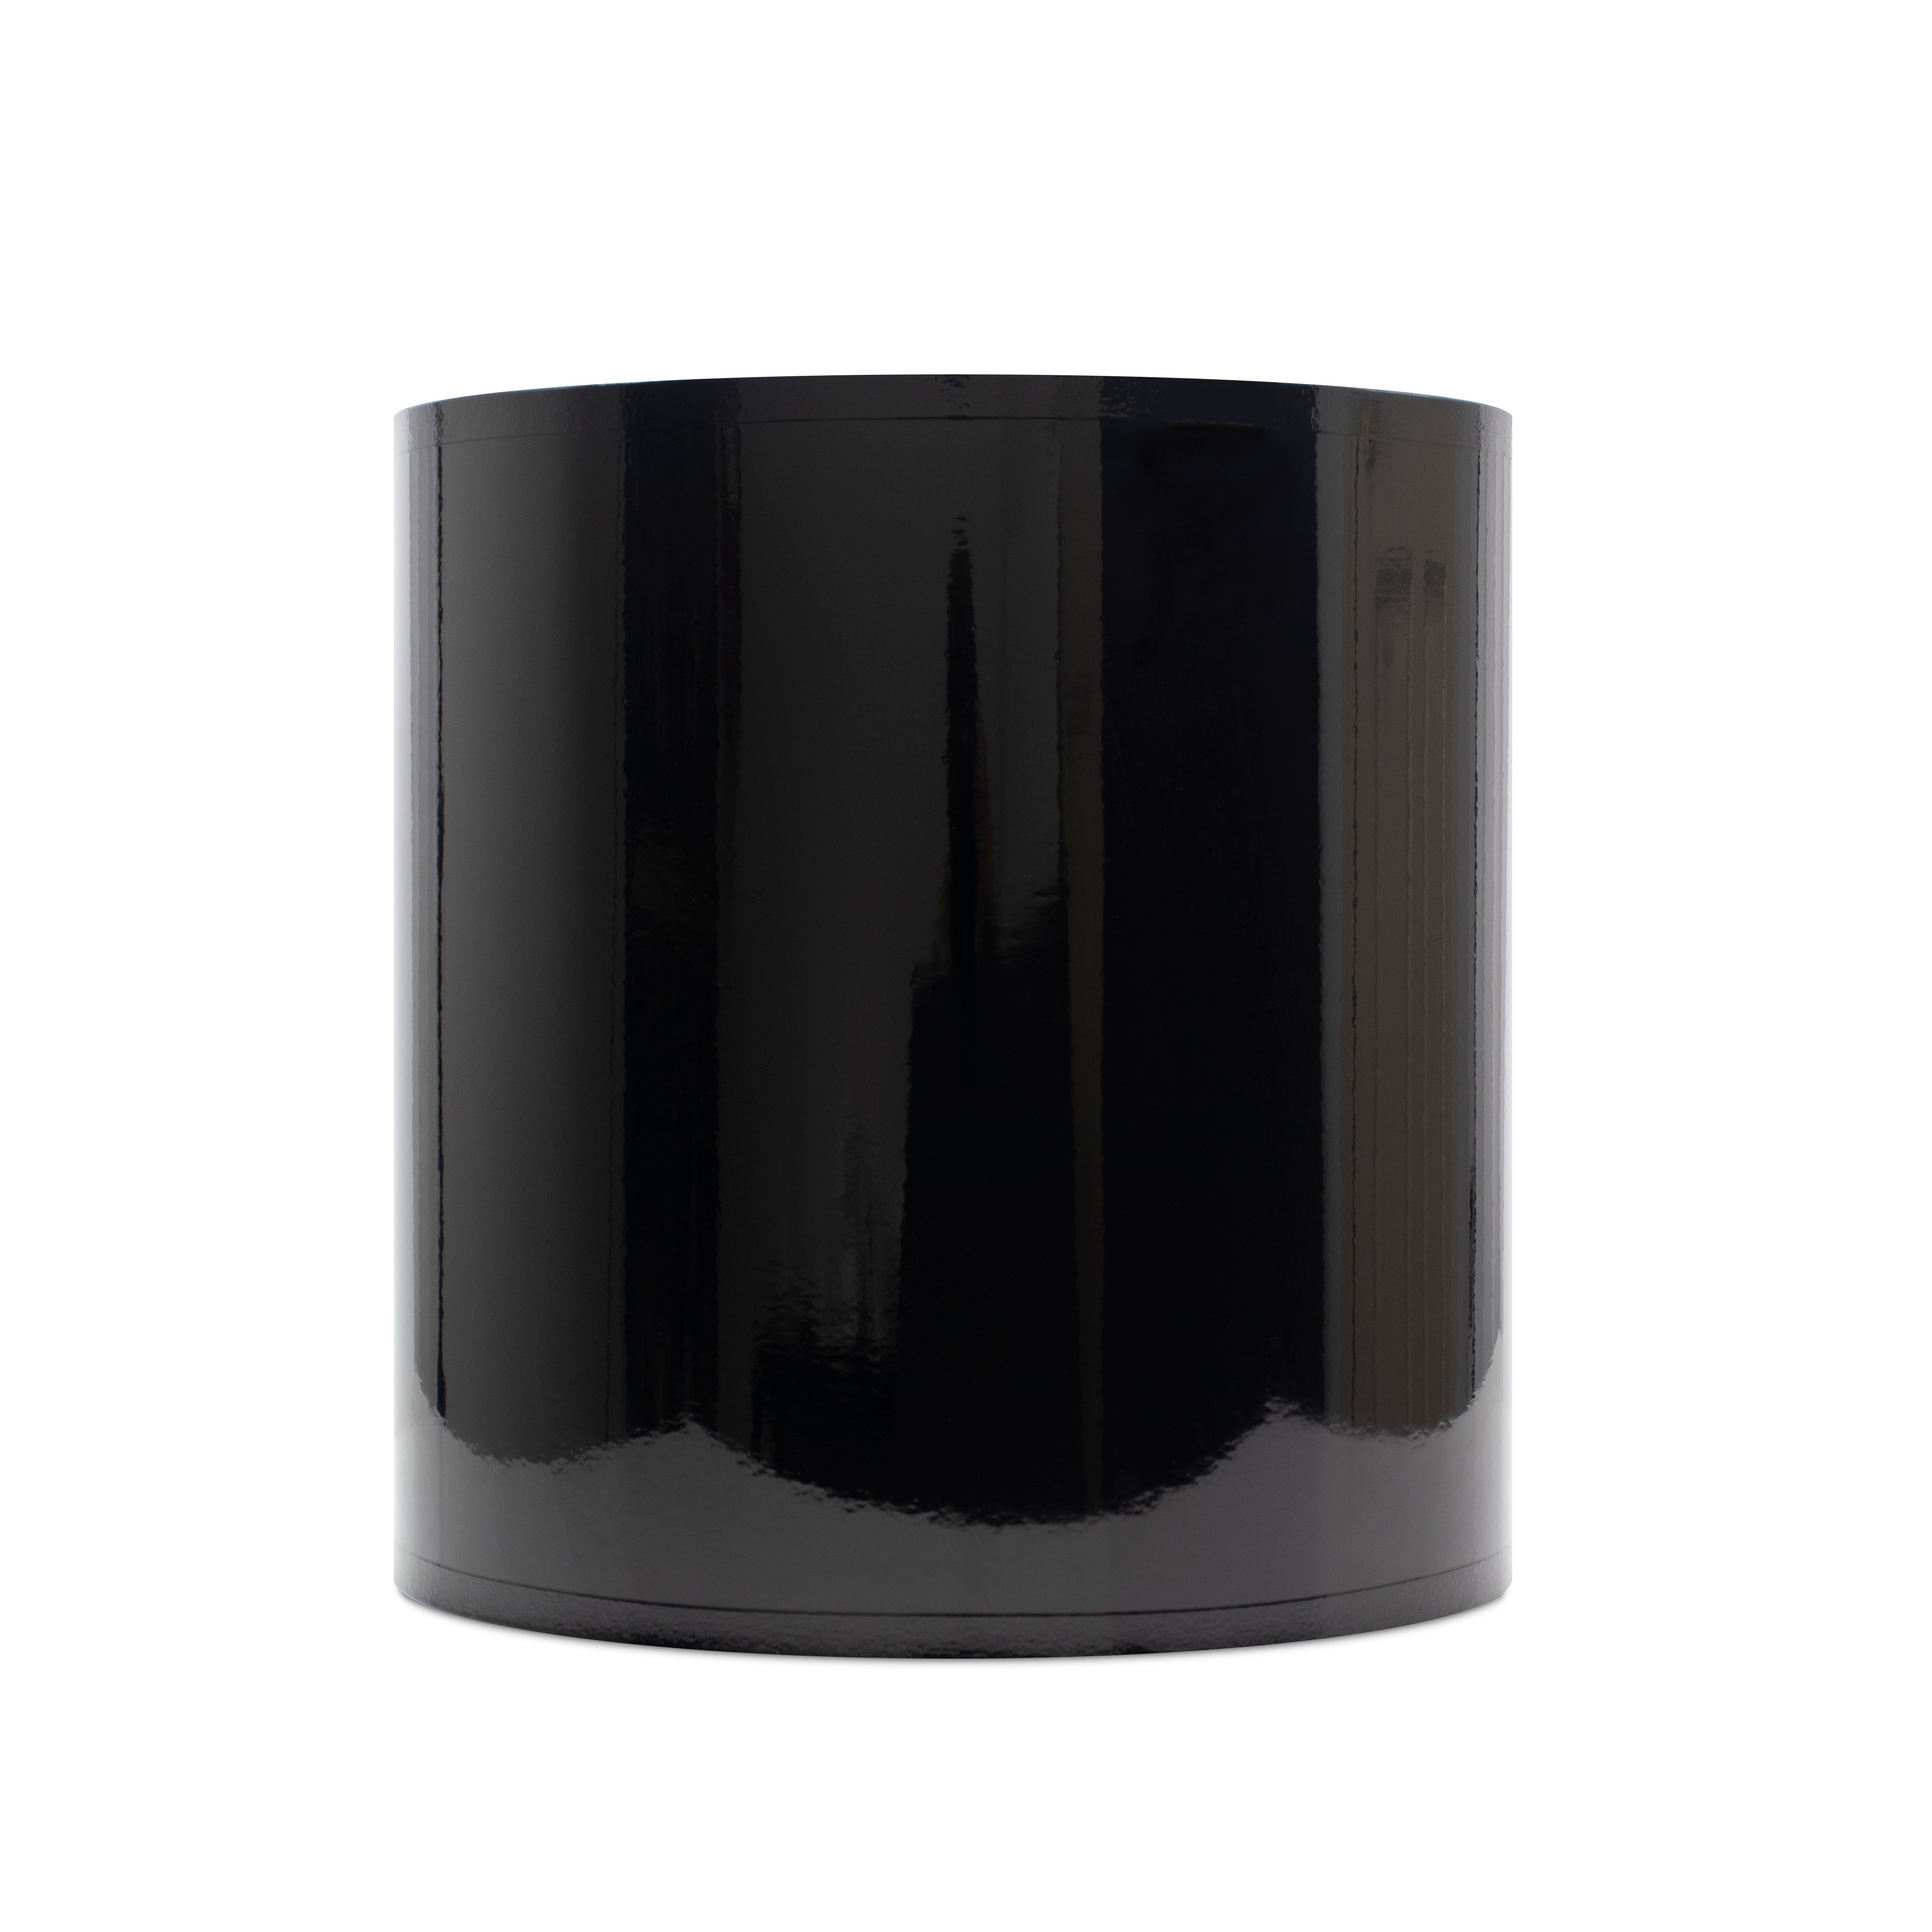 Black Onyx Lacquer Shade with Gold Lining - Couture Lamps